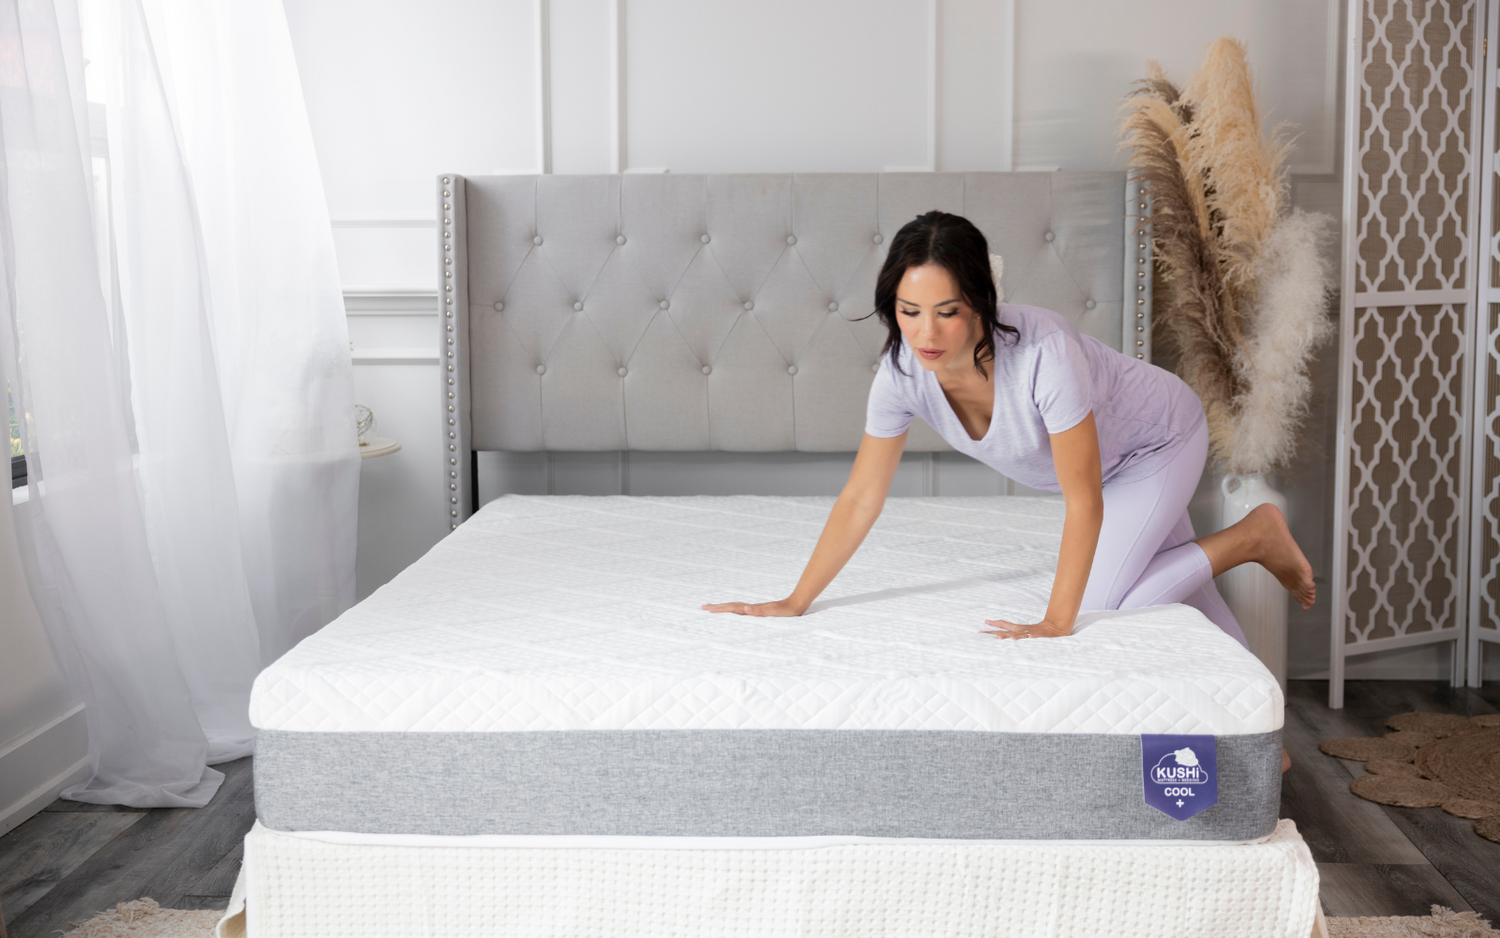 4 Cooling Mattress Benefits for Hot Sleepers